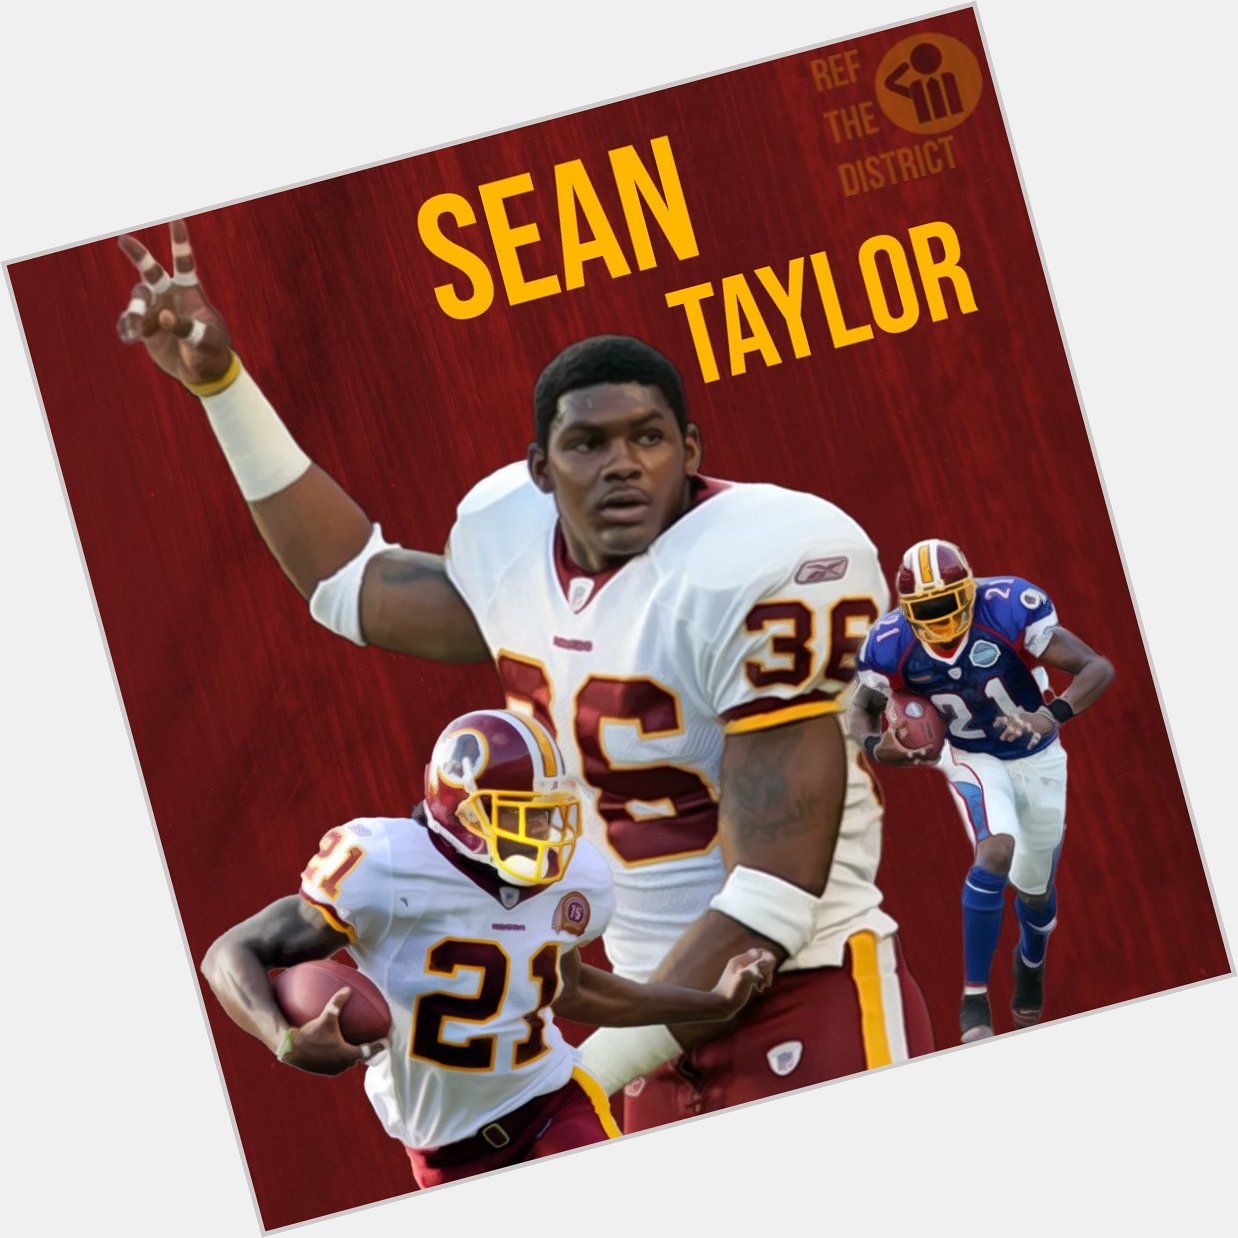 Happy birthday to the legend, one of the best to ever take the field, Sean Taylor. 